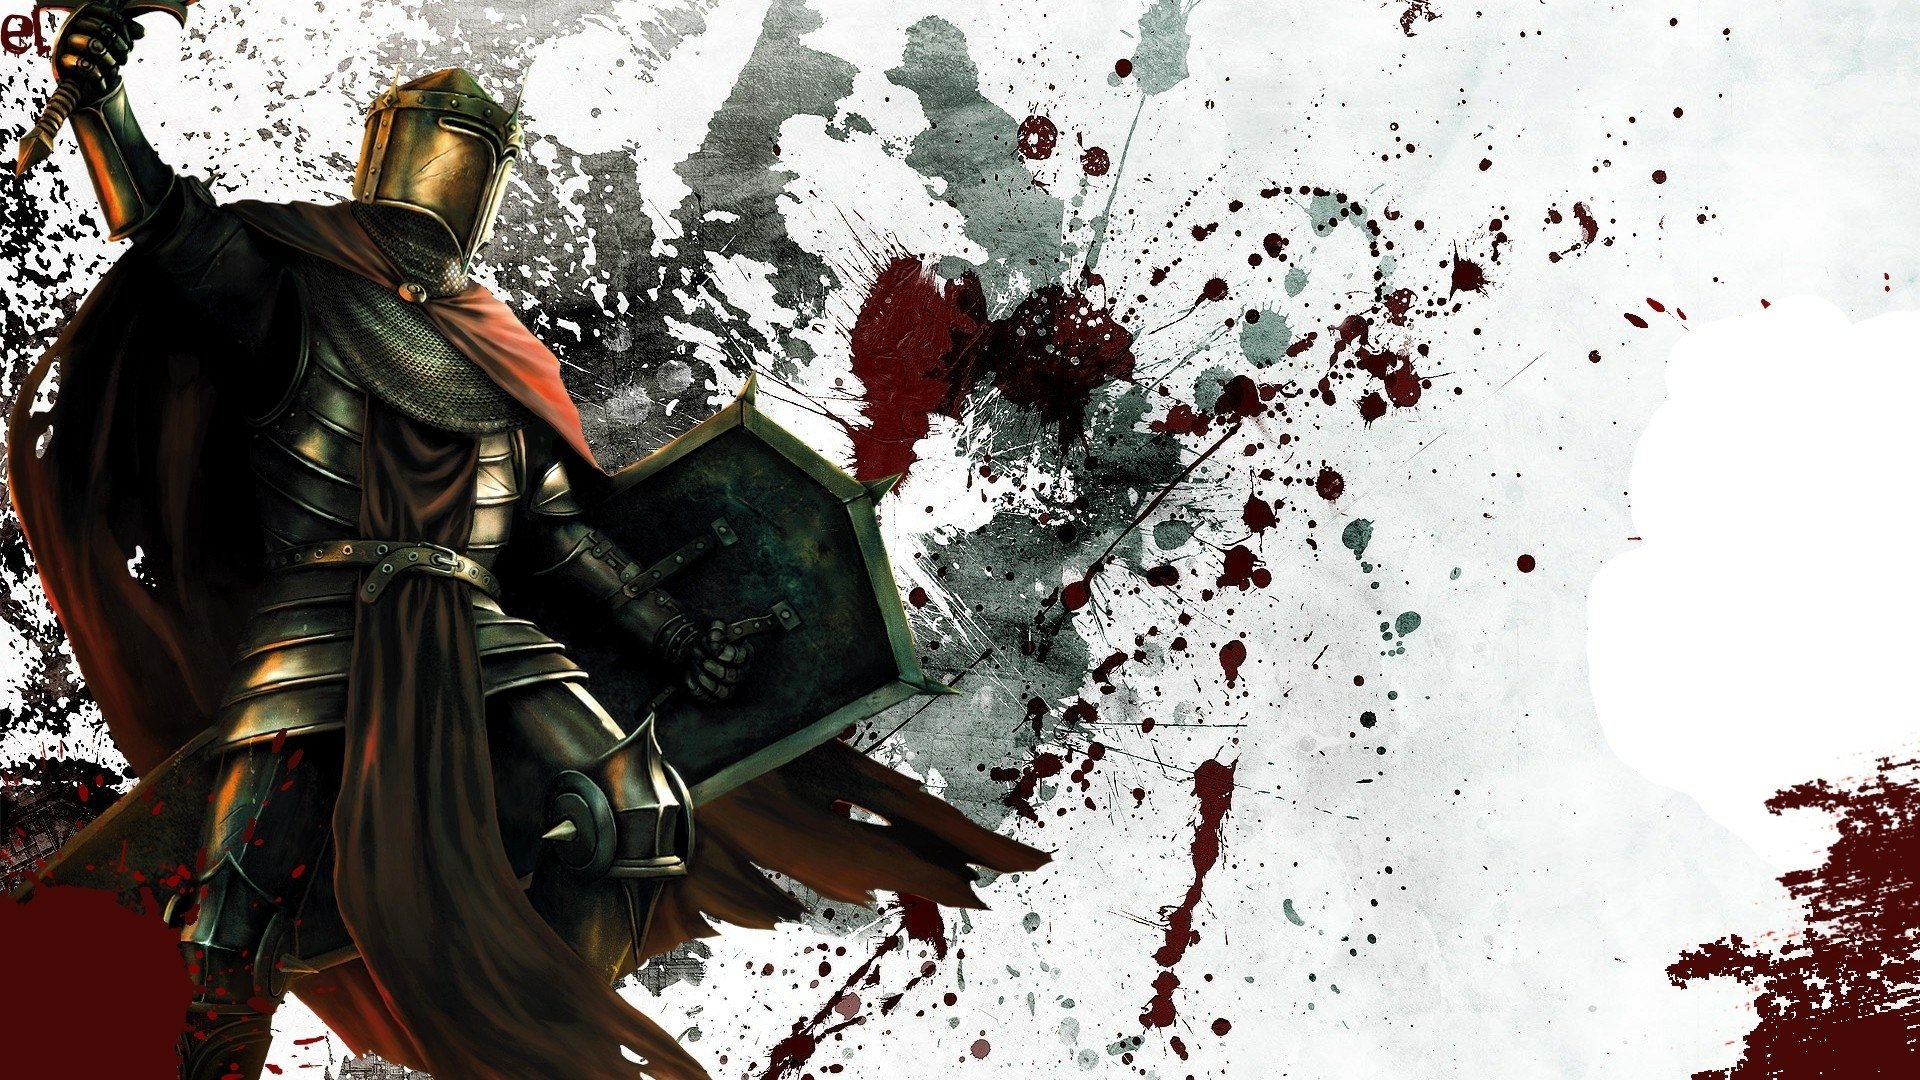 A brave knight on a quest in a fantasy world, ready for battle. Perfect HD desktop wallpaper.